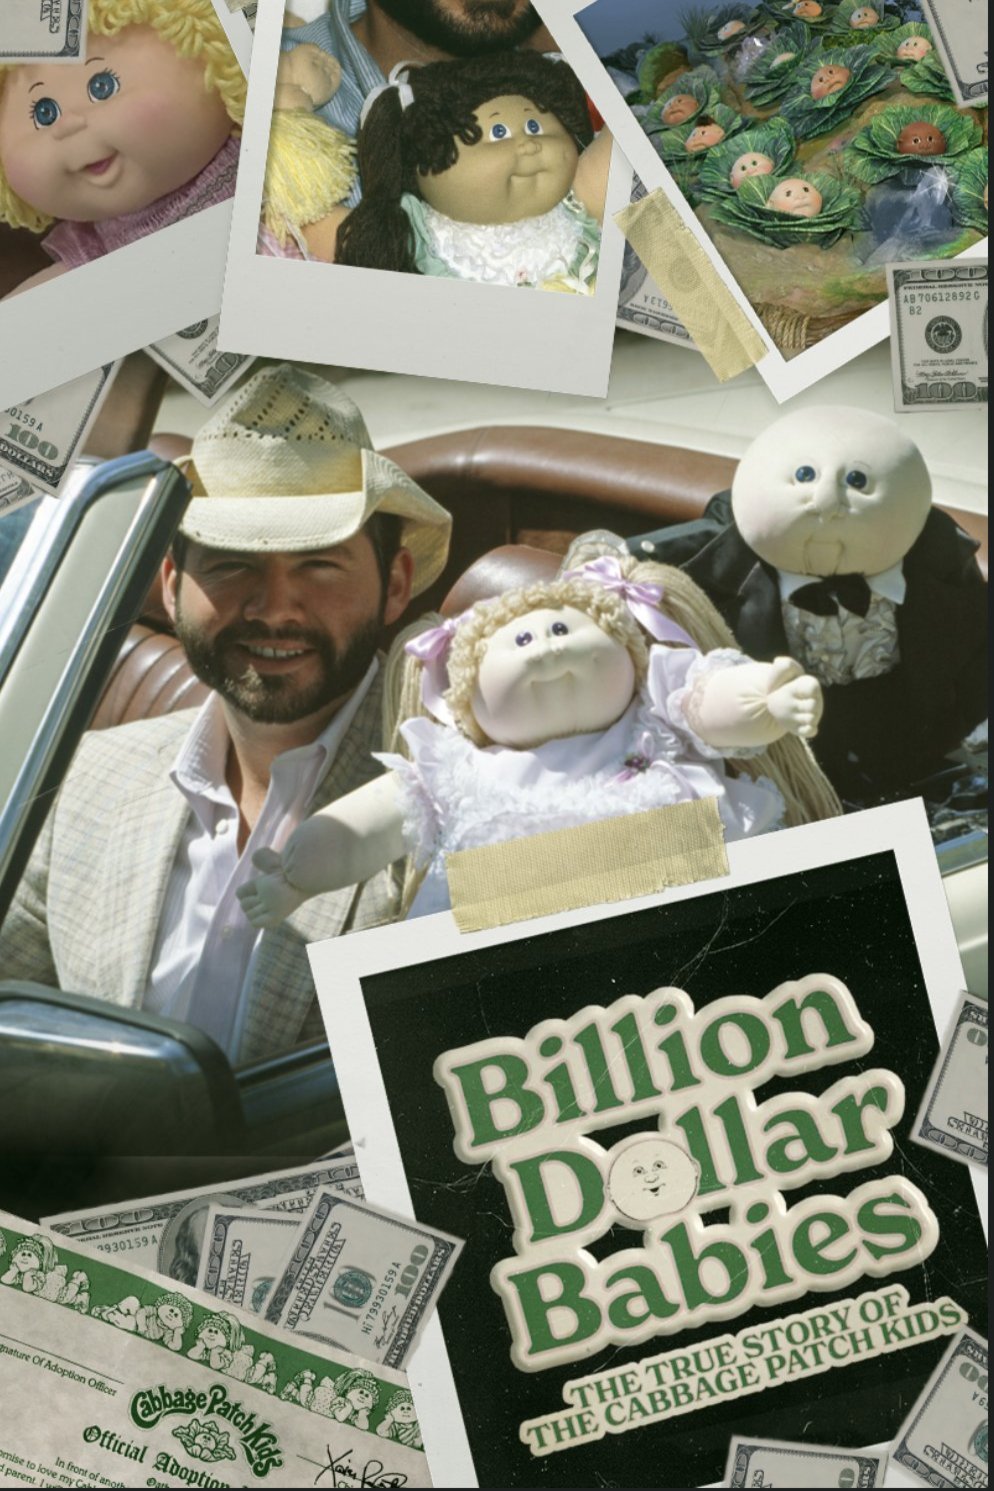 Poster of the movie Billion Dollar Babies: The True Story of the Cabbage Patch Kids